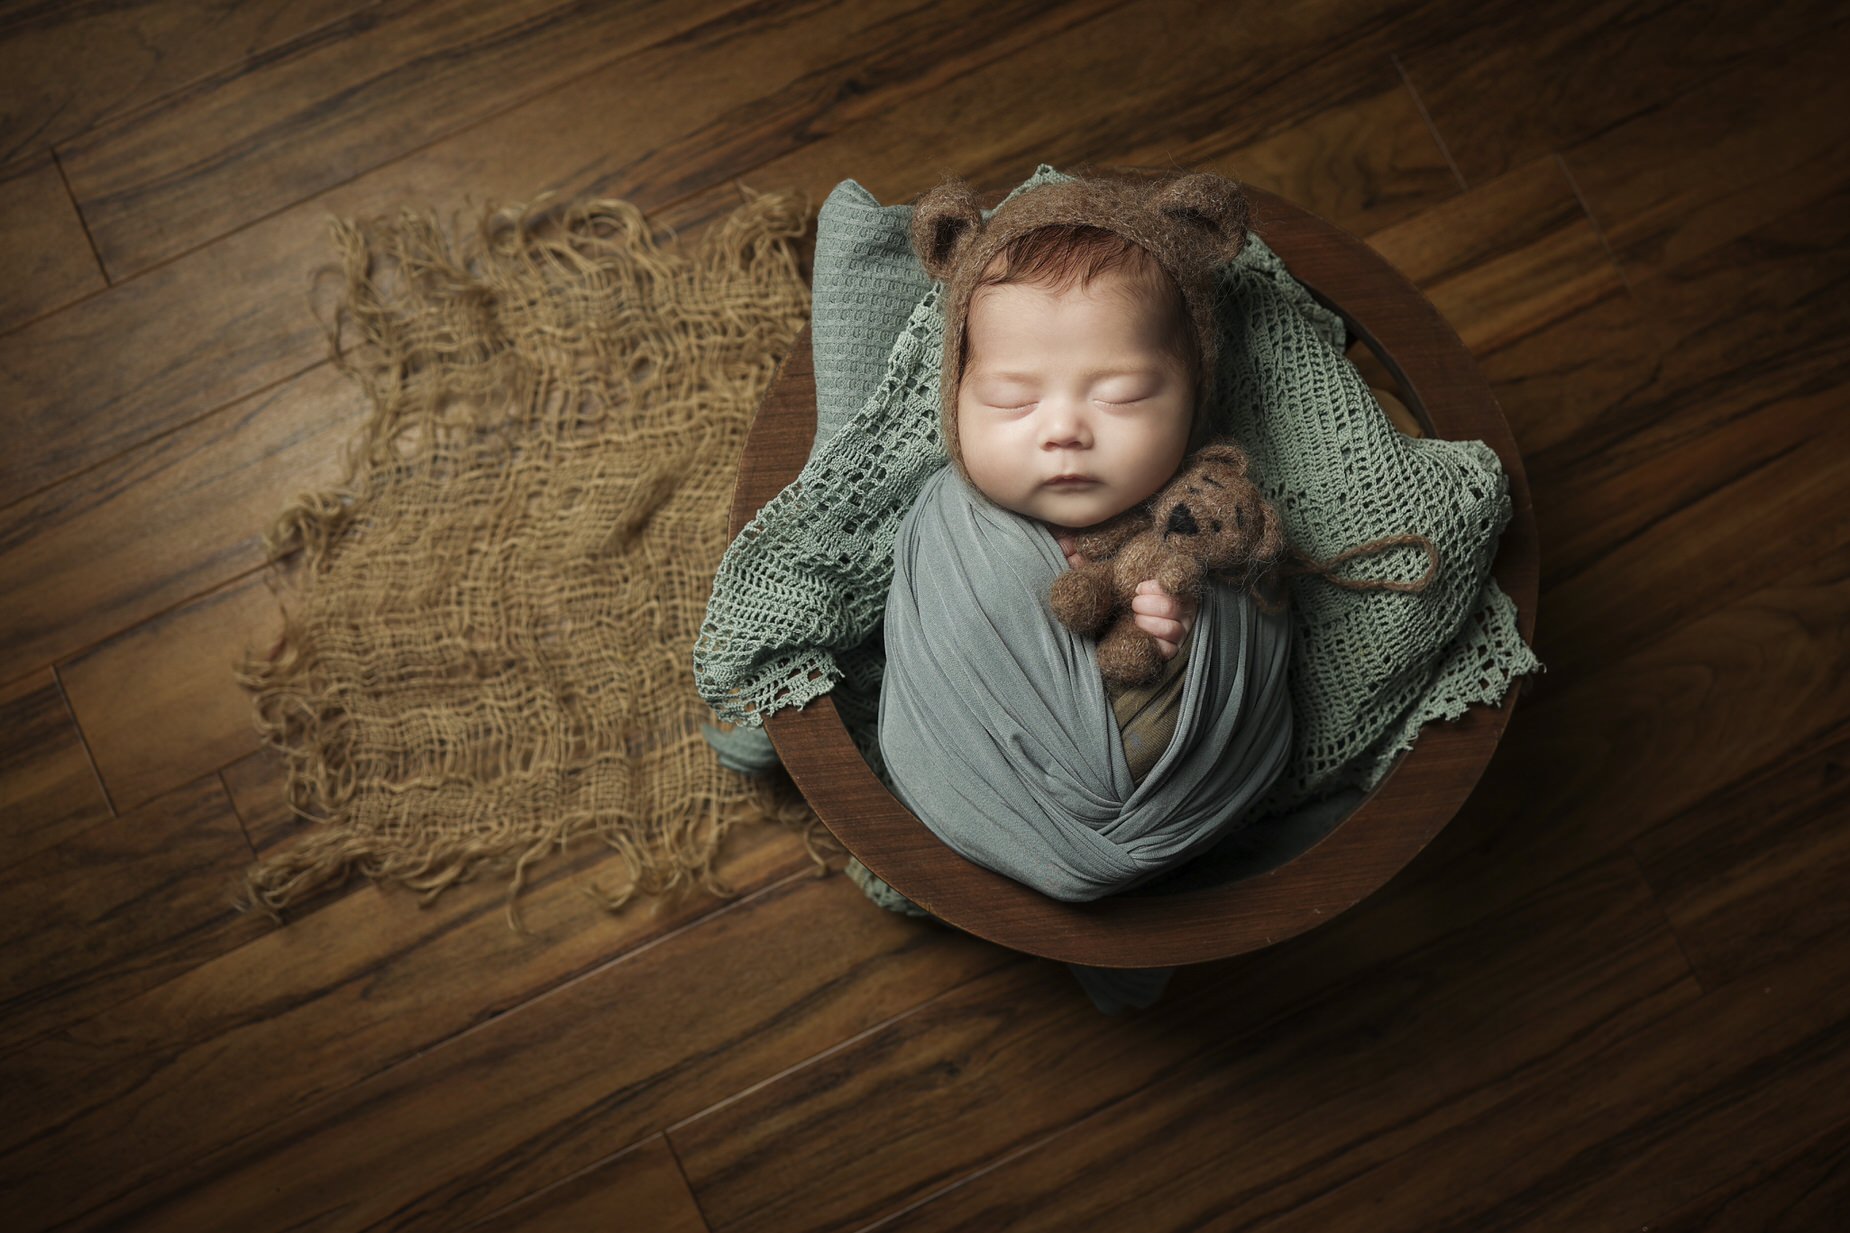 newborn asleep in basket all wrapped up cozy looking from above.